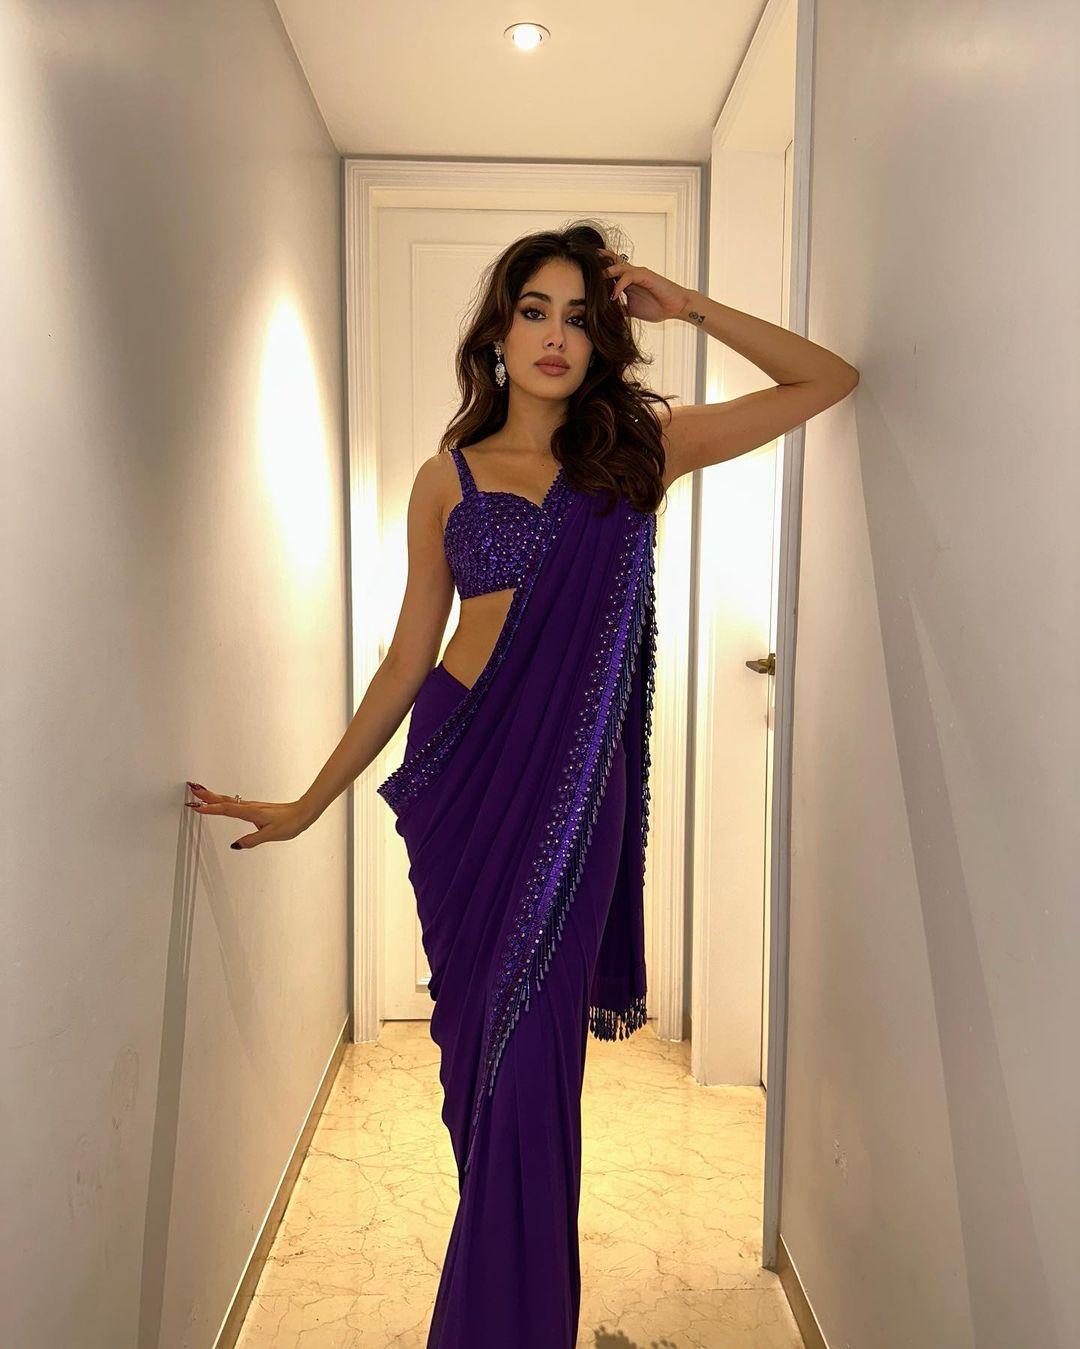 Janhvi Kapoor makes a statement in an electric blue saree with an embellished blouse